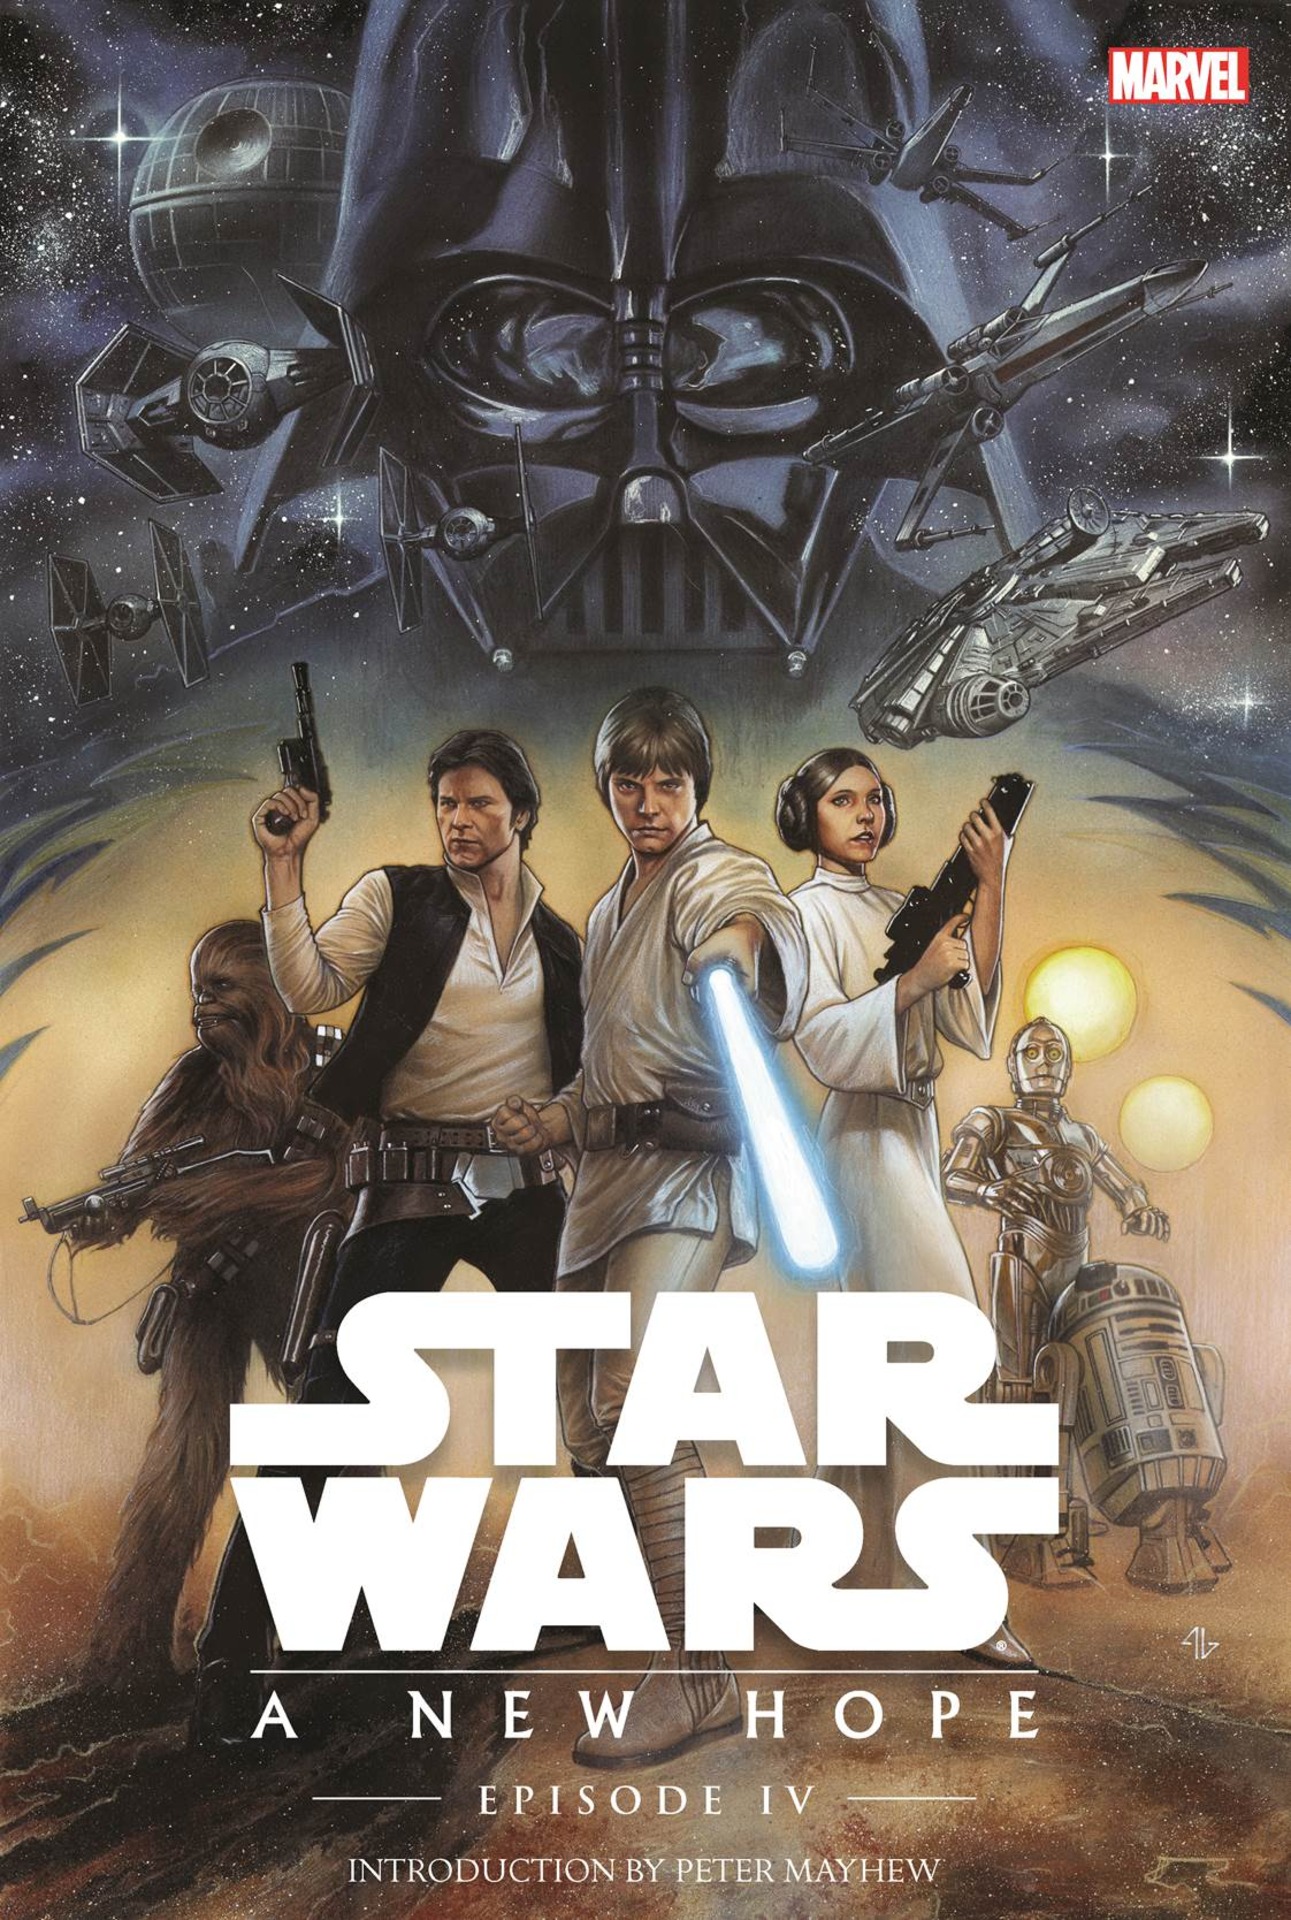 Star Wars Episode IV: A New Hope Backgrounds, Compatible - PC, Mobile, Gadgets| 1291x1920 px